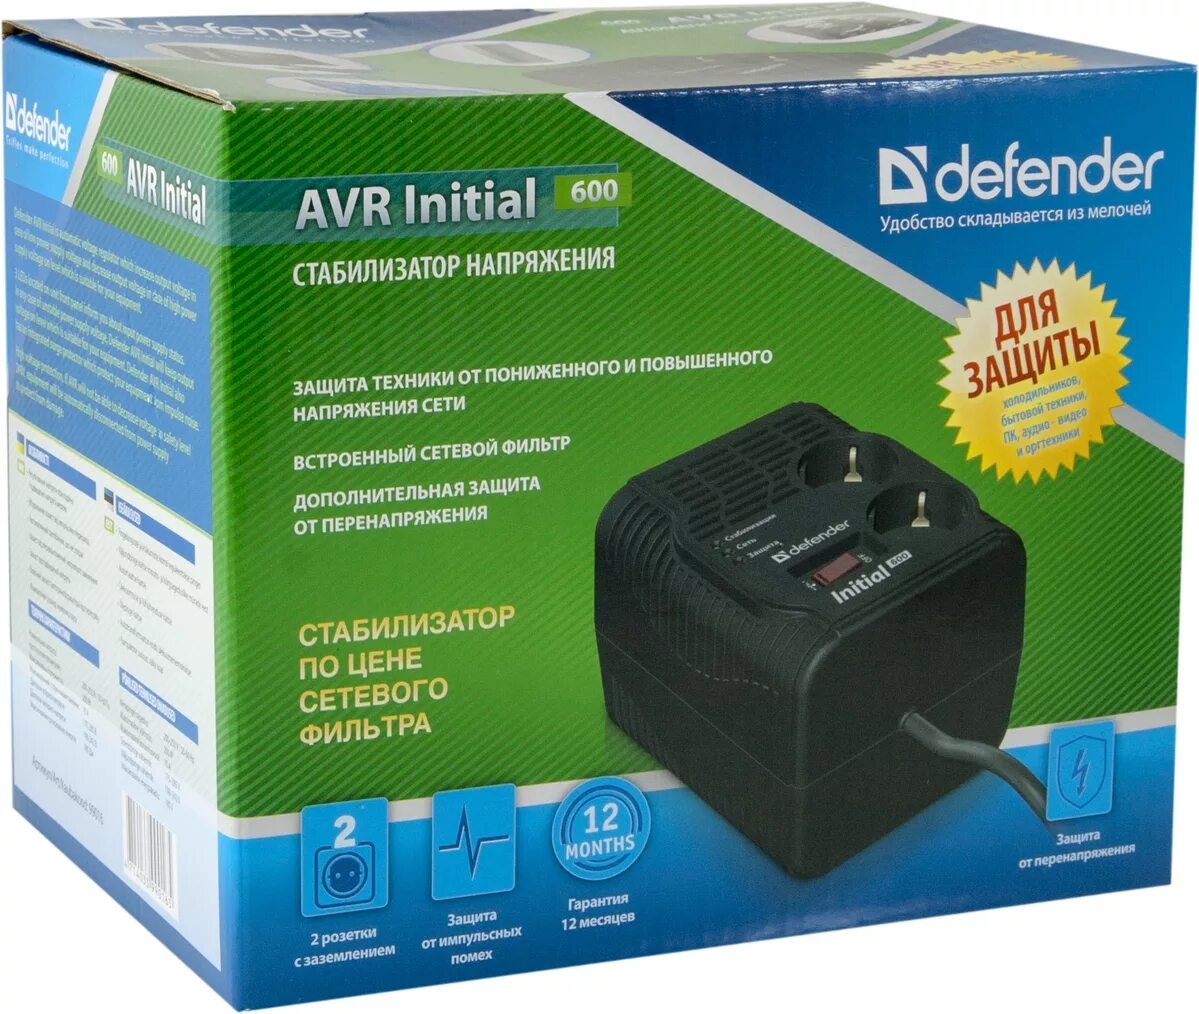 Defender initial. Стабилизатор напряжения Defender 600va. Стабилизатор Defender initial 600. Стабилизатор напряжения 220в Дефендер initial 600. Стабилизатор Дефендер AVR 600.